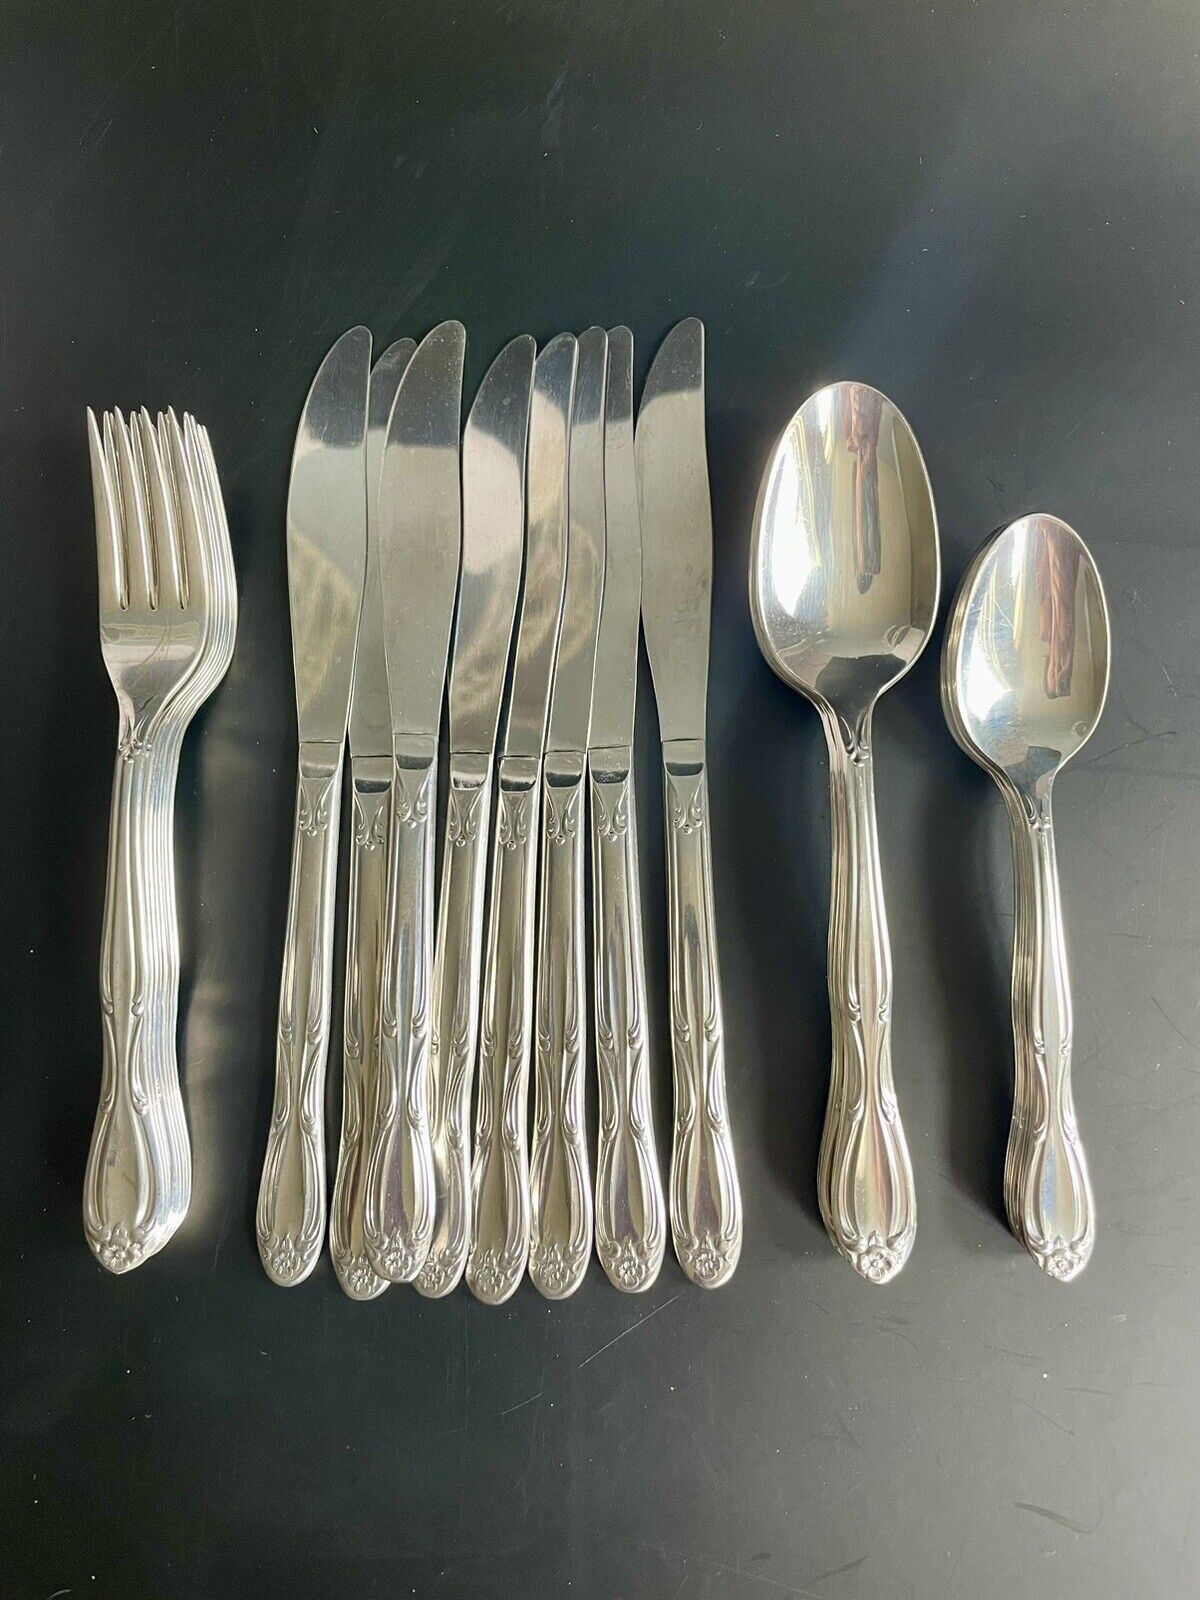 Americana AMP2 MCM 31 Pc Flatware Stainless Steel Service For 8 Minus 1 Fork